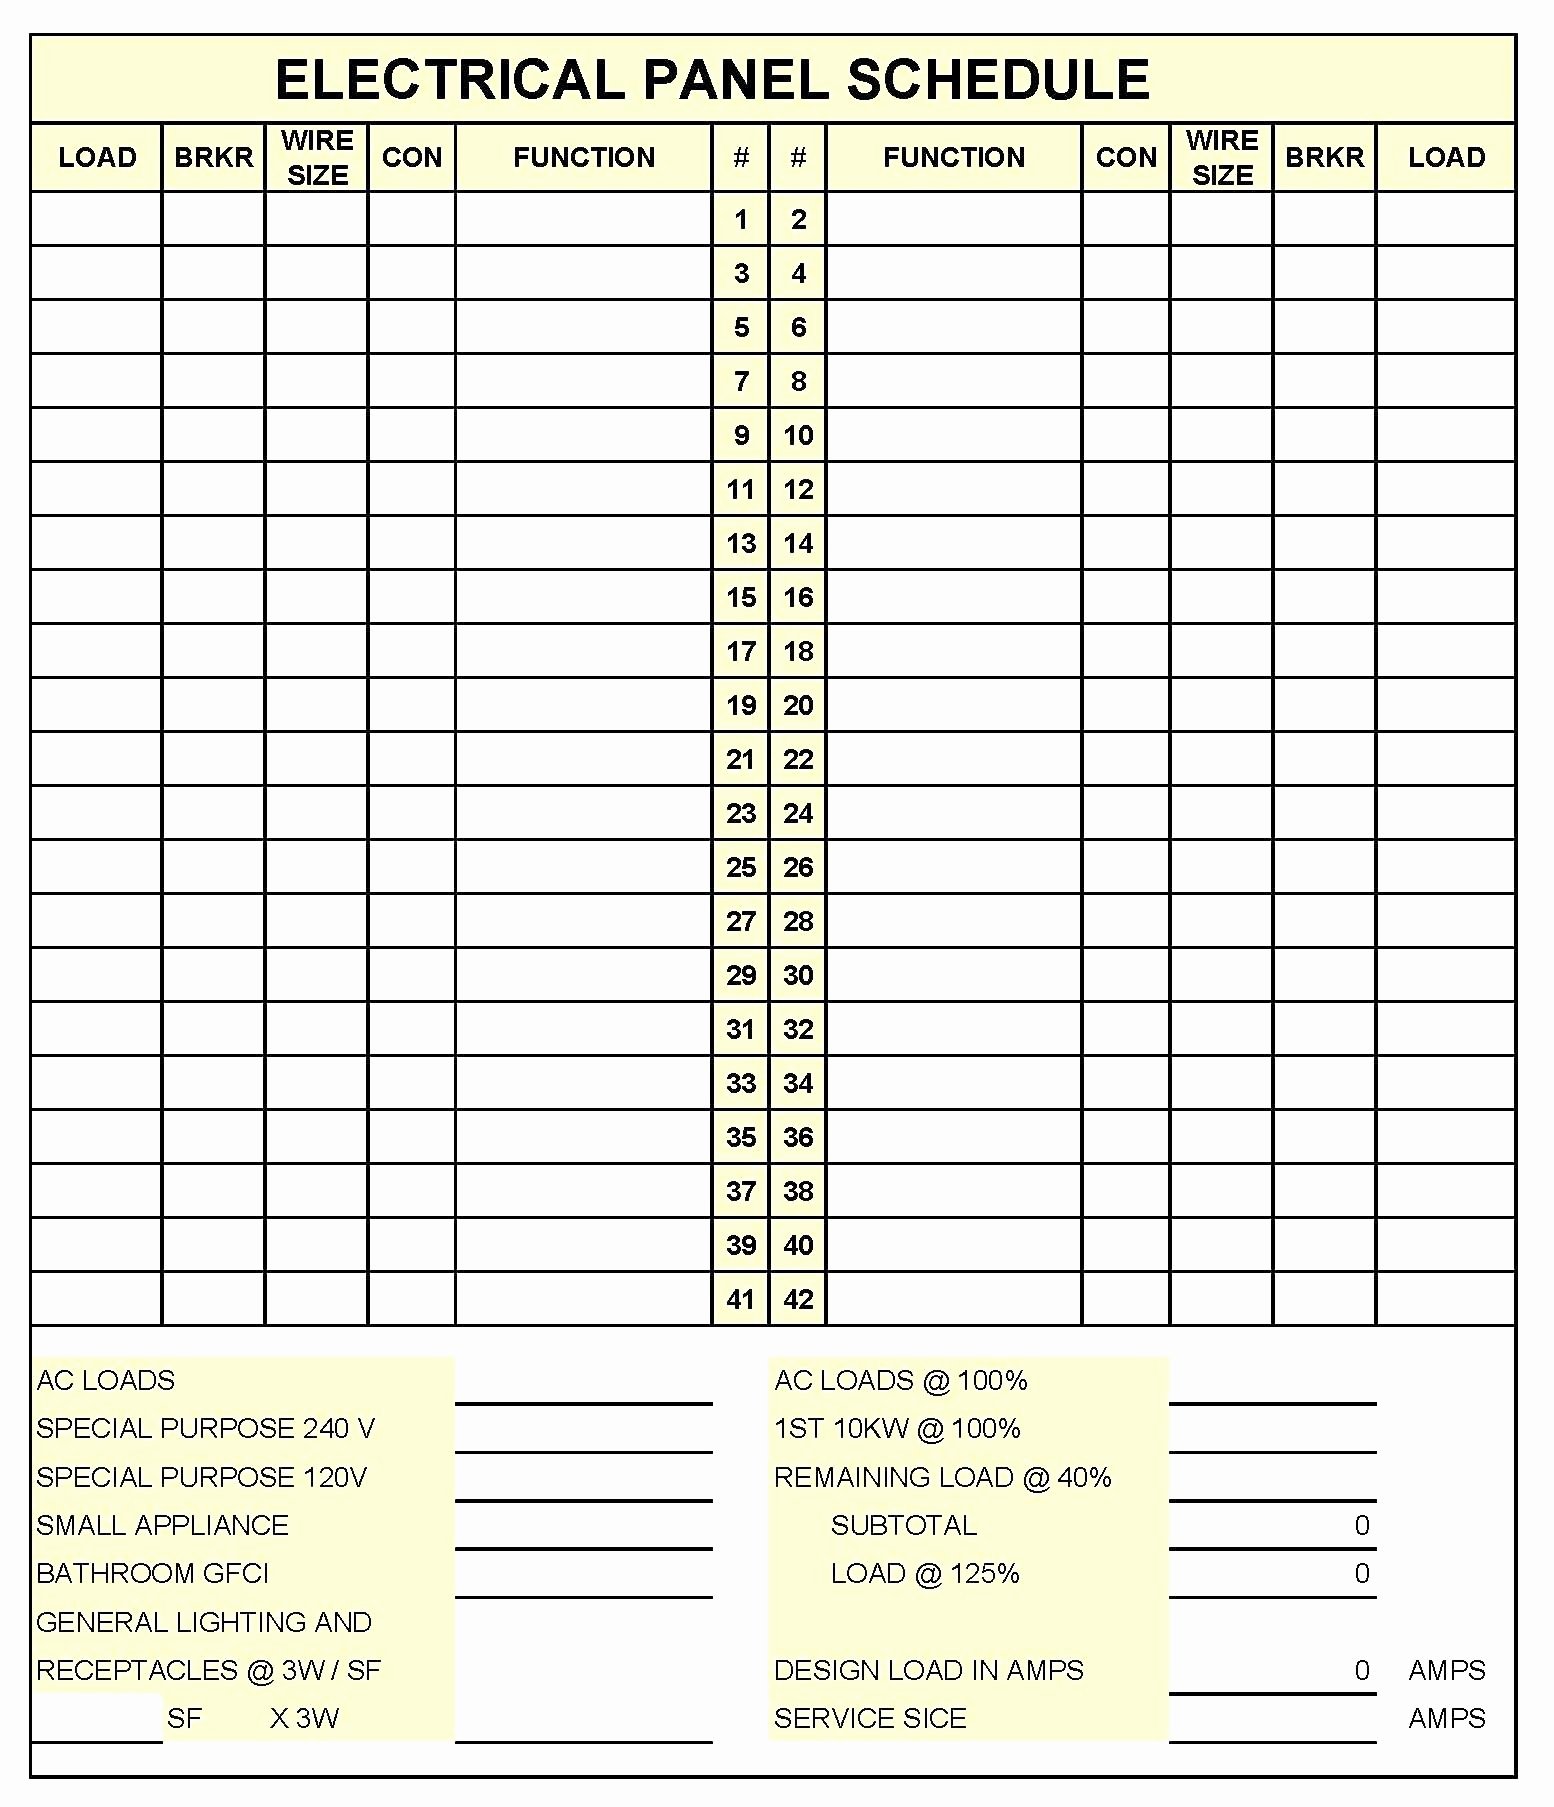 Electrical Panel Schedule Template Excel Luxury Electrical Panel Schedule Template Excel